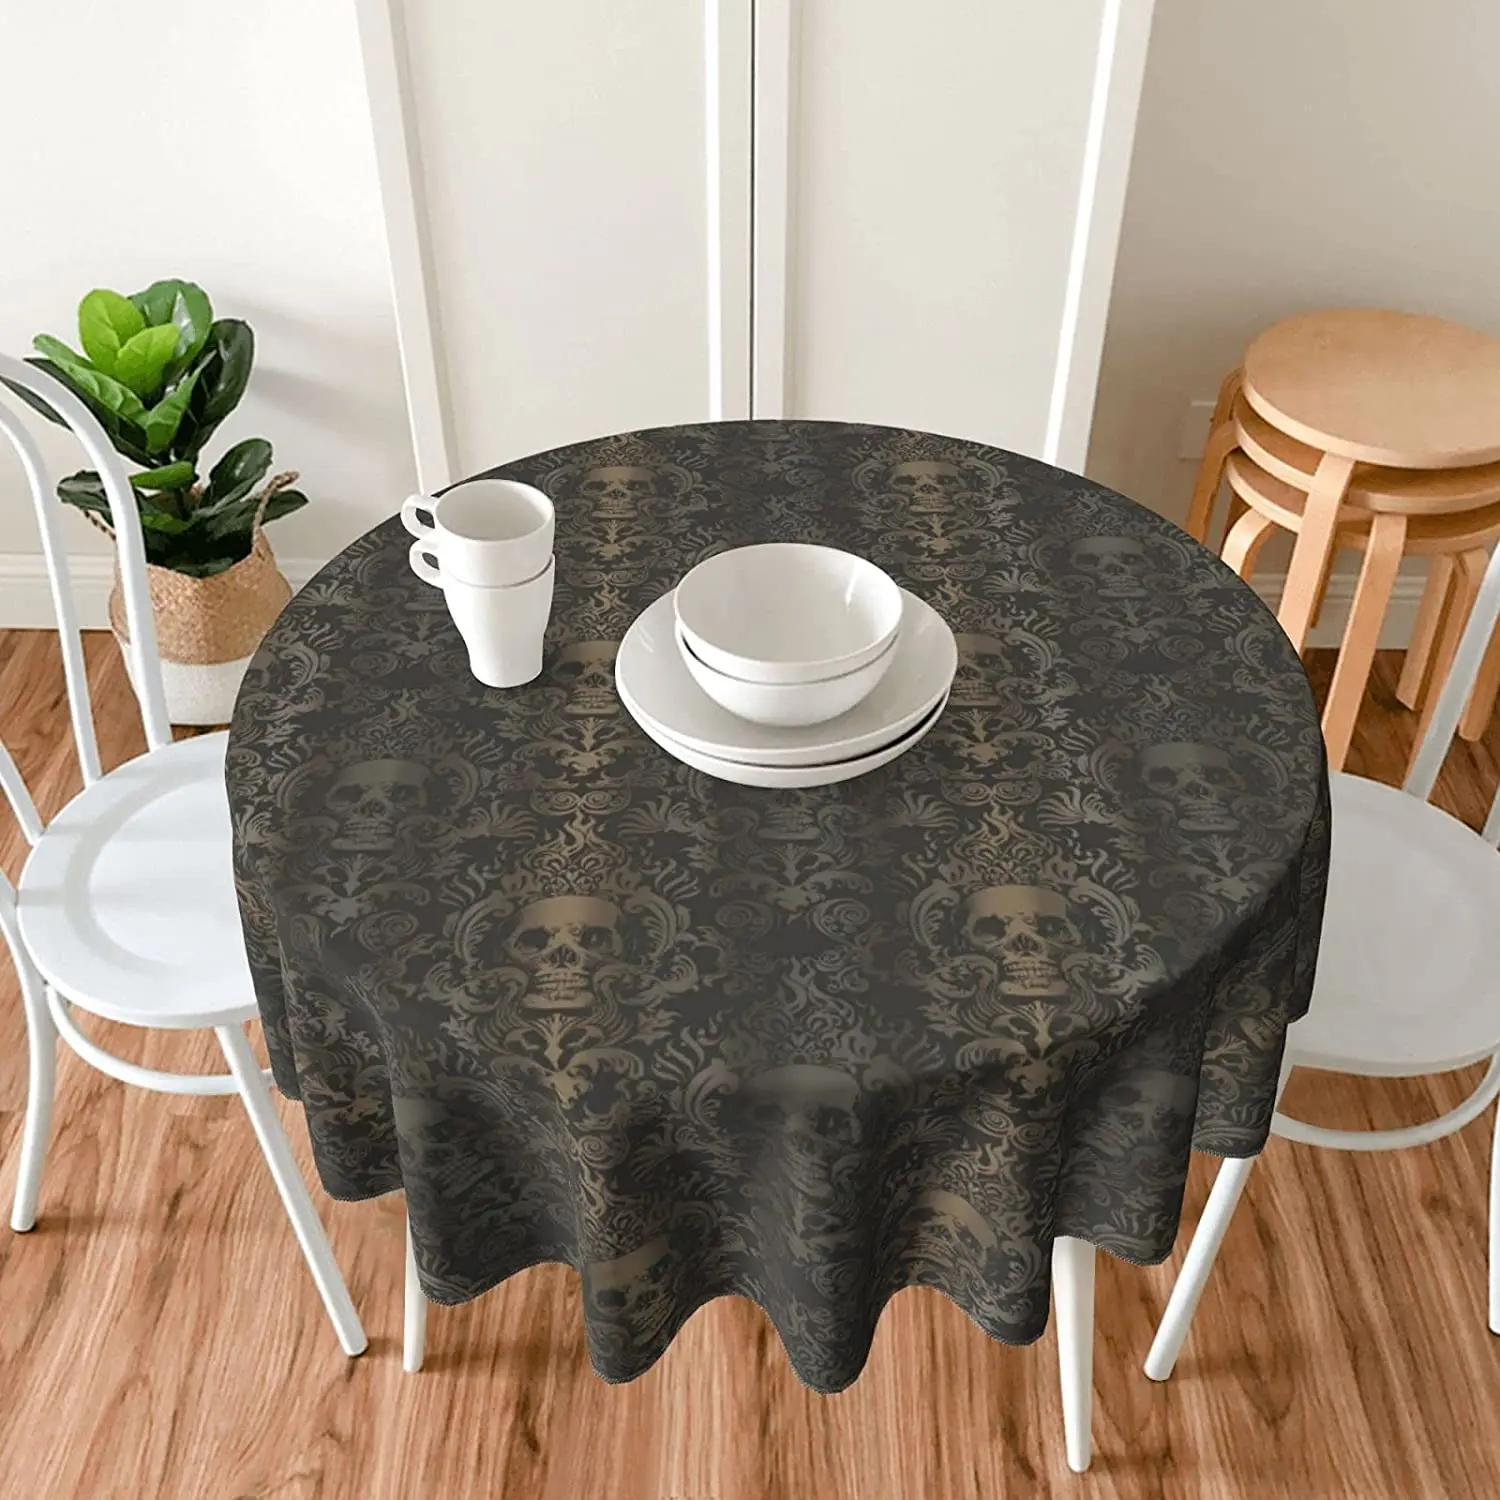 

Damask Halloween Gothic Skull Round Tablecloth 60 Inch Washable Polyester Table Cloth Water Resistant Spill Proof Table Cover